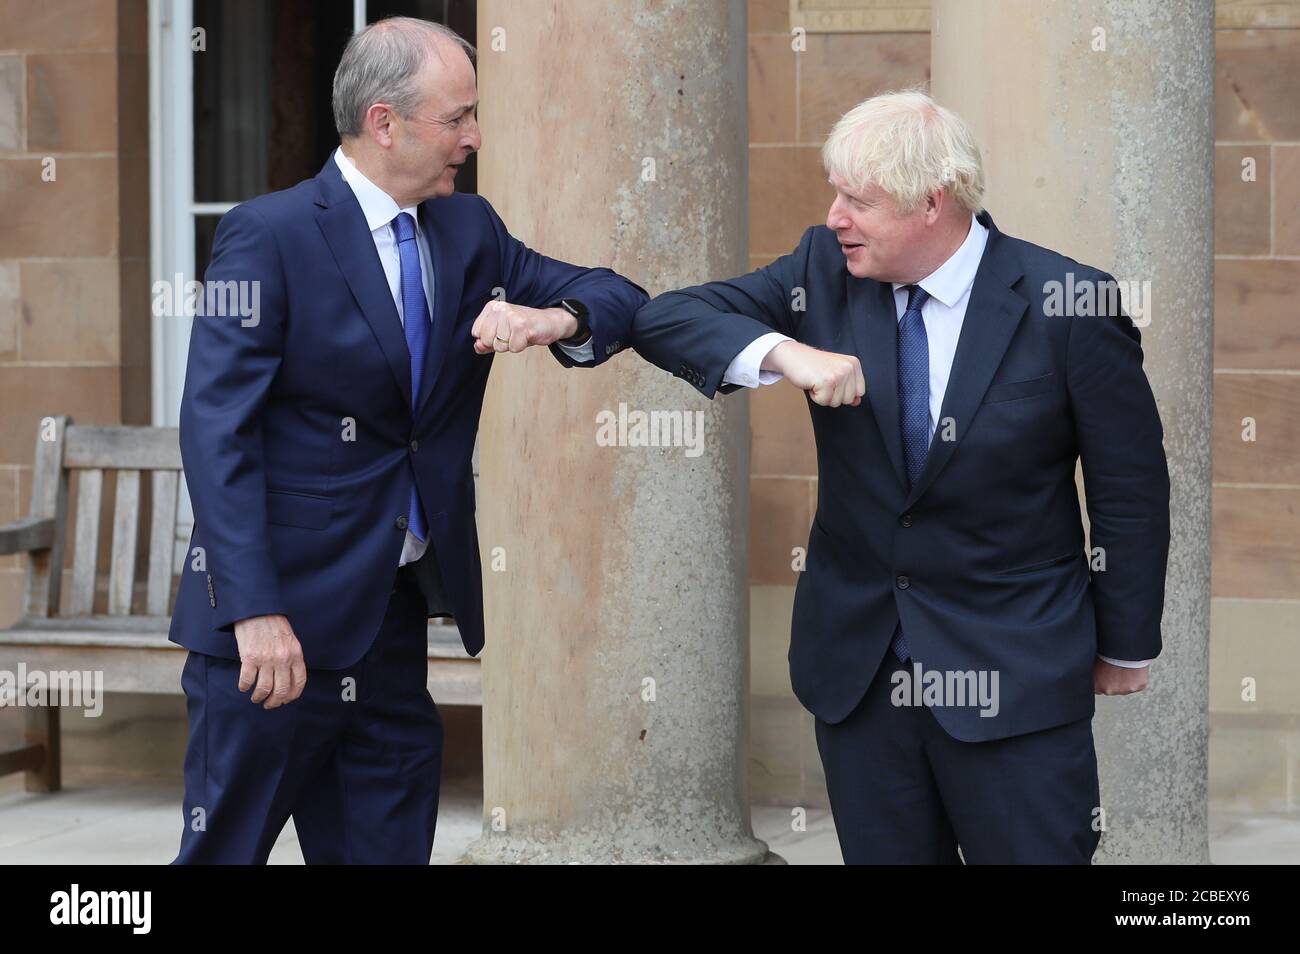 Prime Minister Boris Johnson (right) and Taoiseach Micheal Martin greet each other with an elbow bump at Hillsborough Castle during the Prime Minister's visit to Belfast. Stock Photo